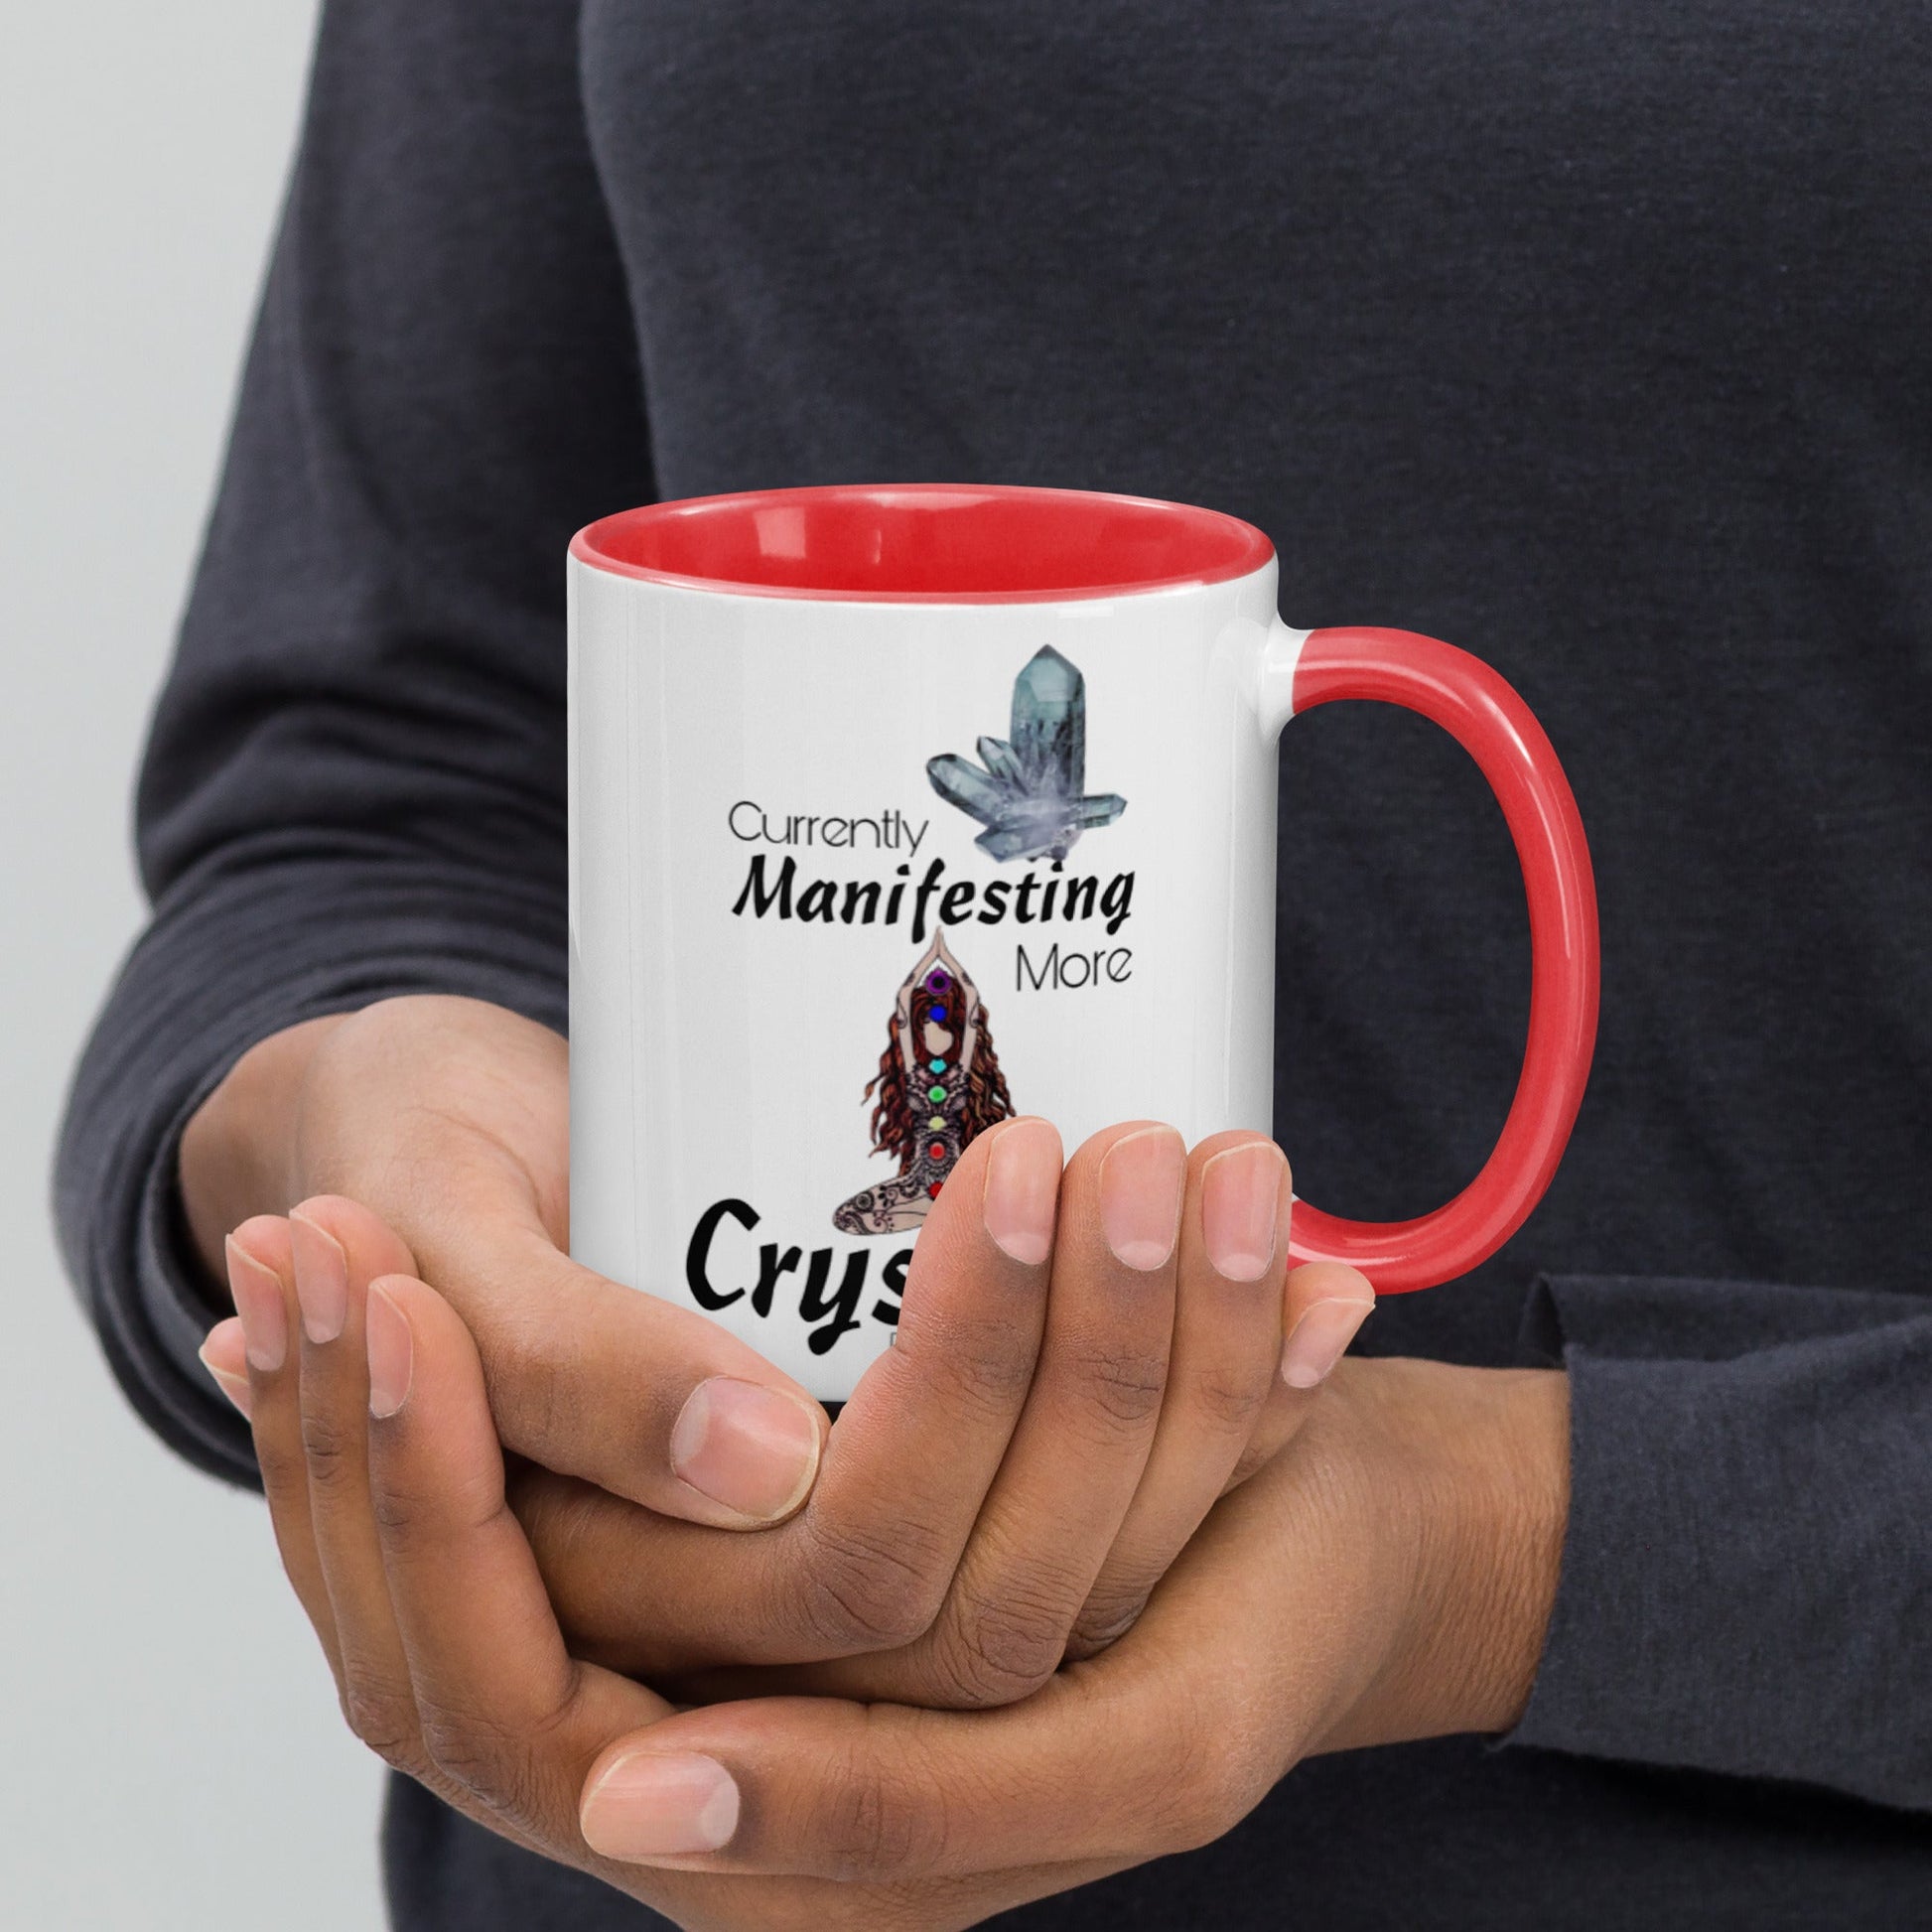 "Manifesting more Crystals" Mug with Color Inside - Earth's Emporium